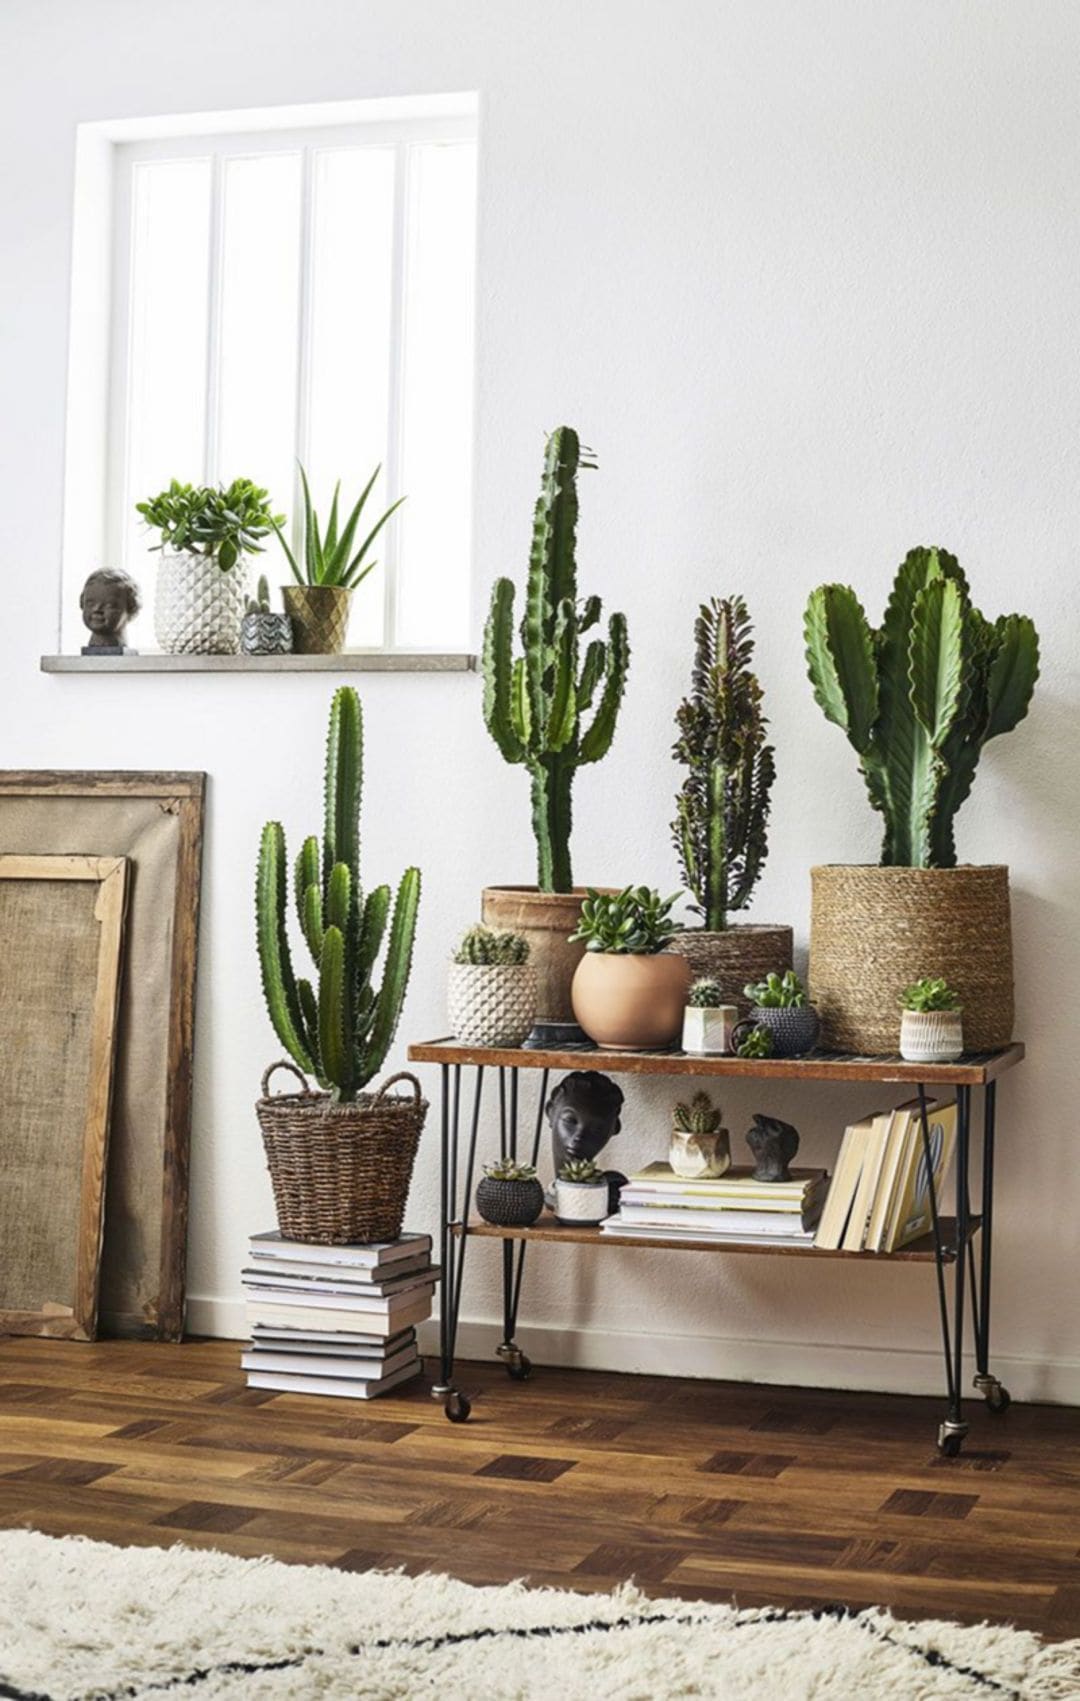 country style room decor, cacti for planters, placed on table